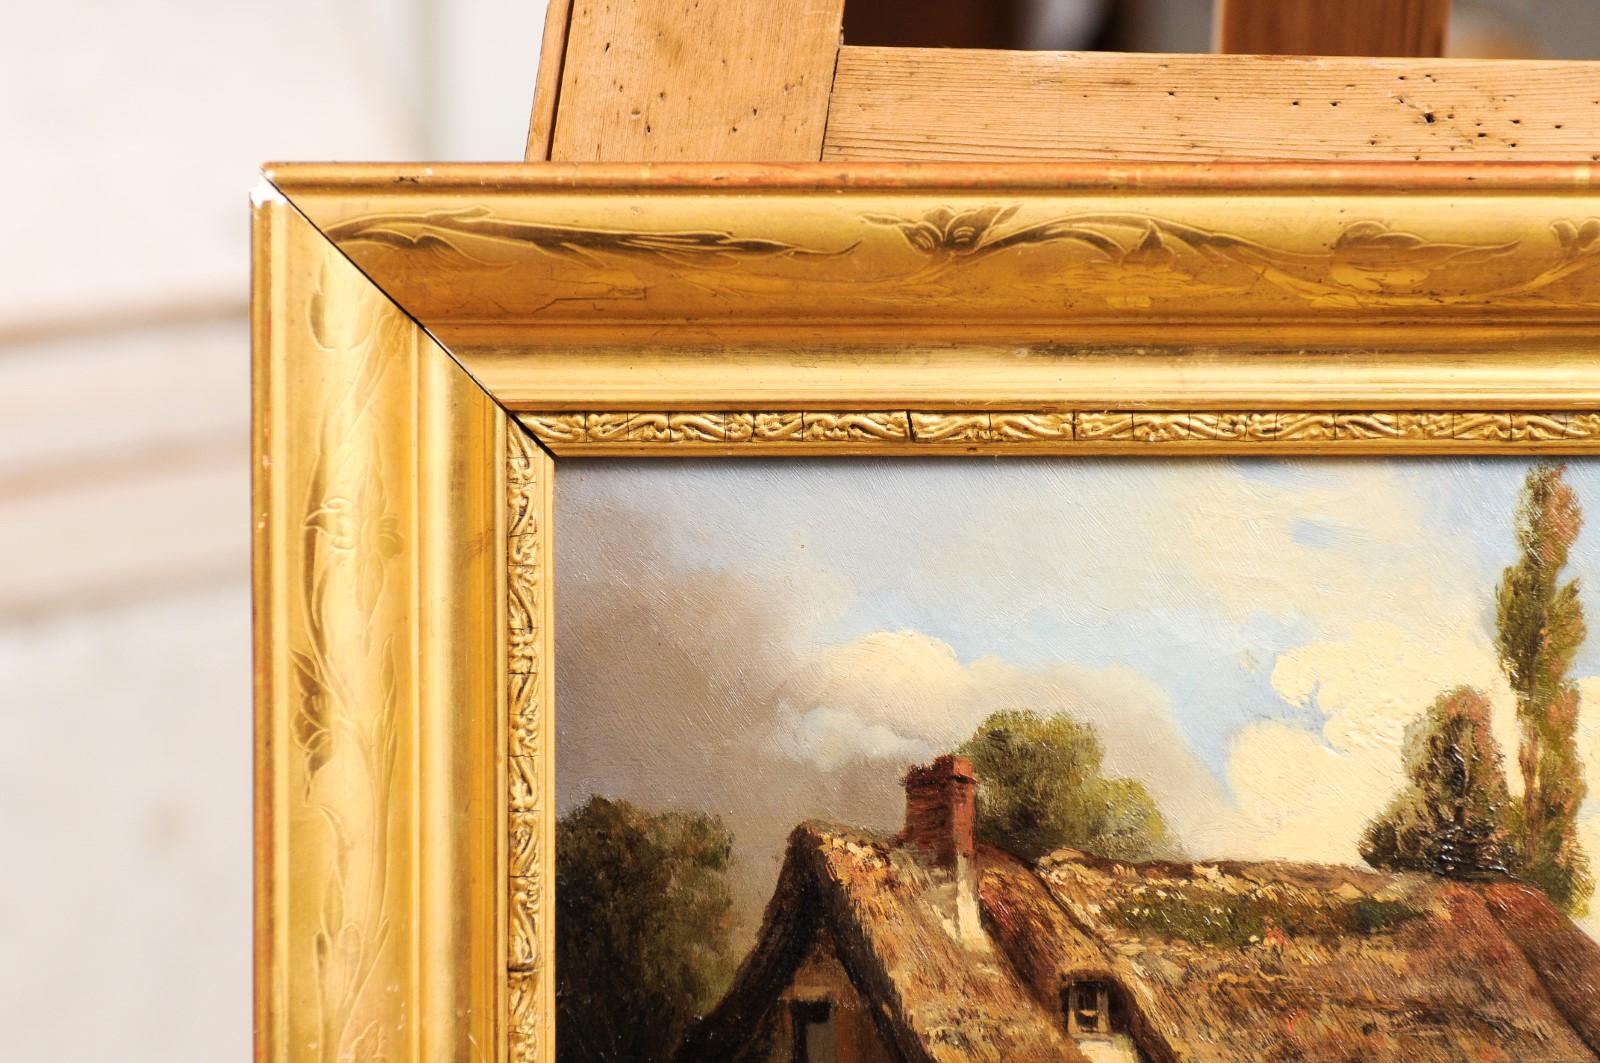 French 19th Century Painting Signed Léon Bertan Depicting a Bucolic Farm Scene For Sale 2